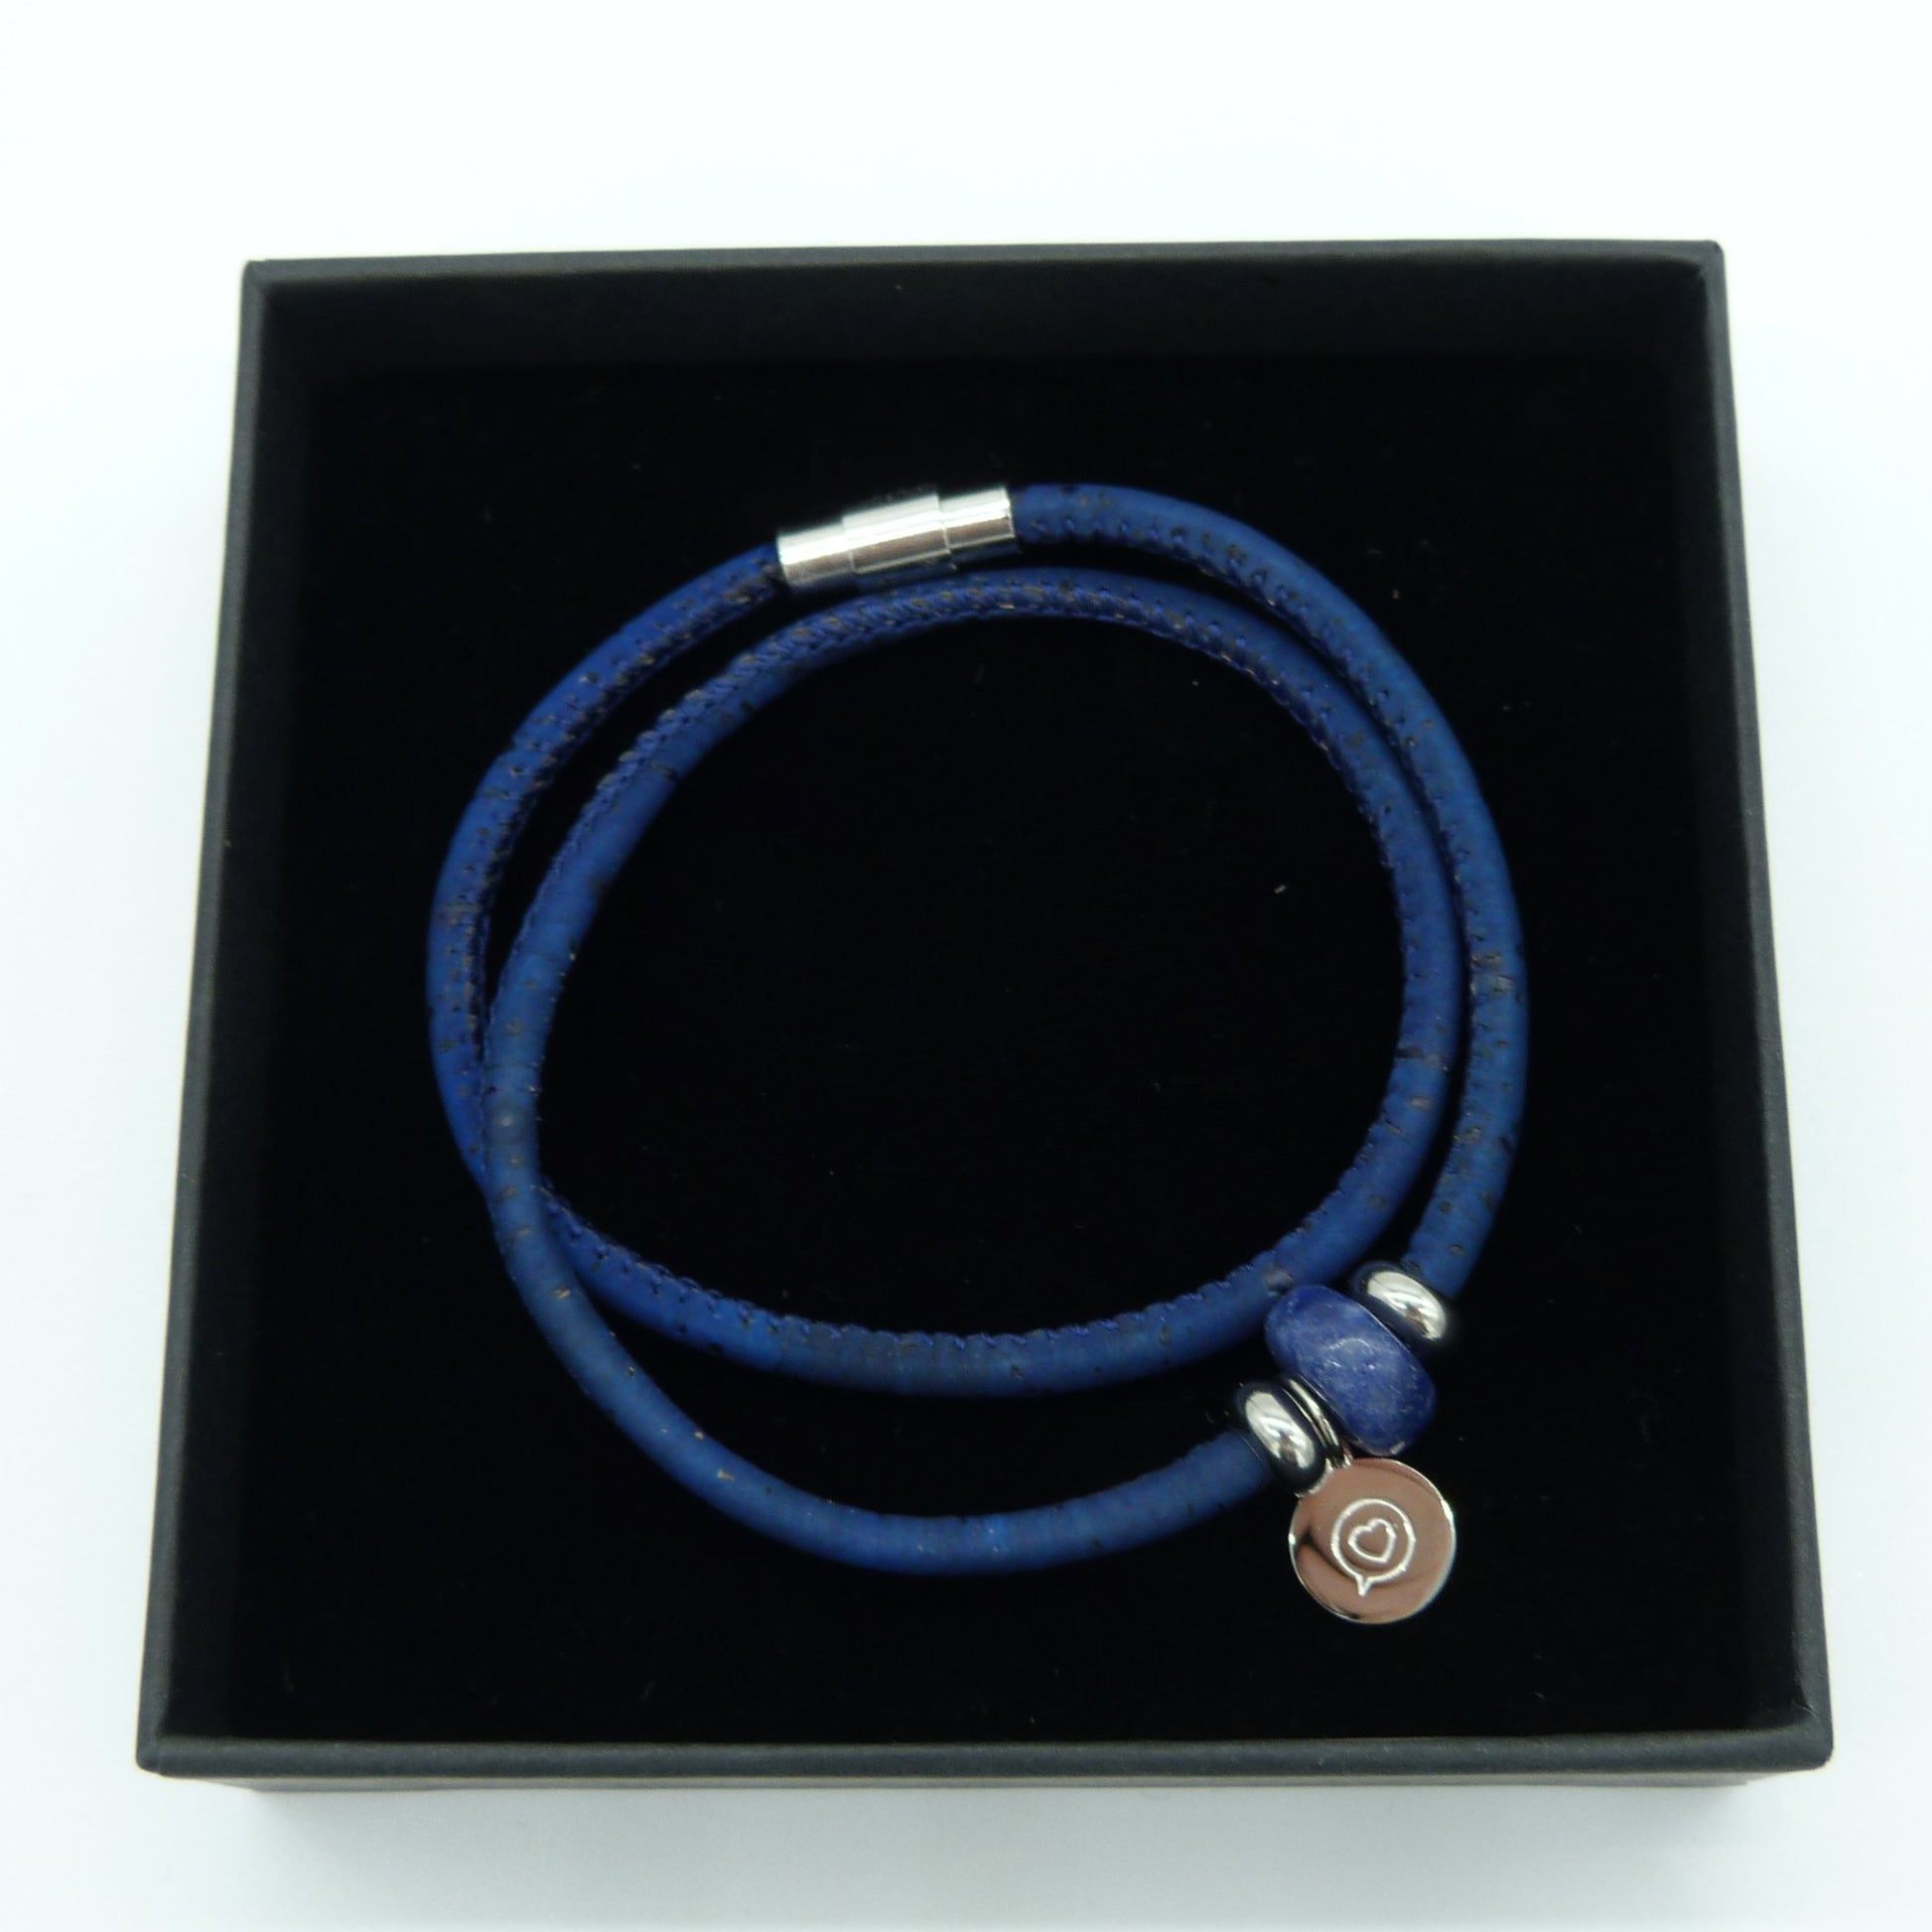 Blue cork bracelet with stainless steel magnetic clasp . Gemstone Sodalite bead with stainless steel tag with the logo of Roo Betty of a heart in a speech bubble . Presented in a black gift box